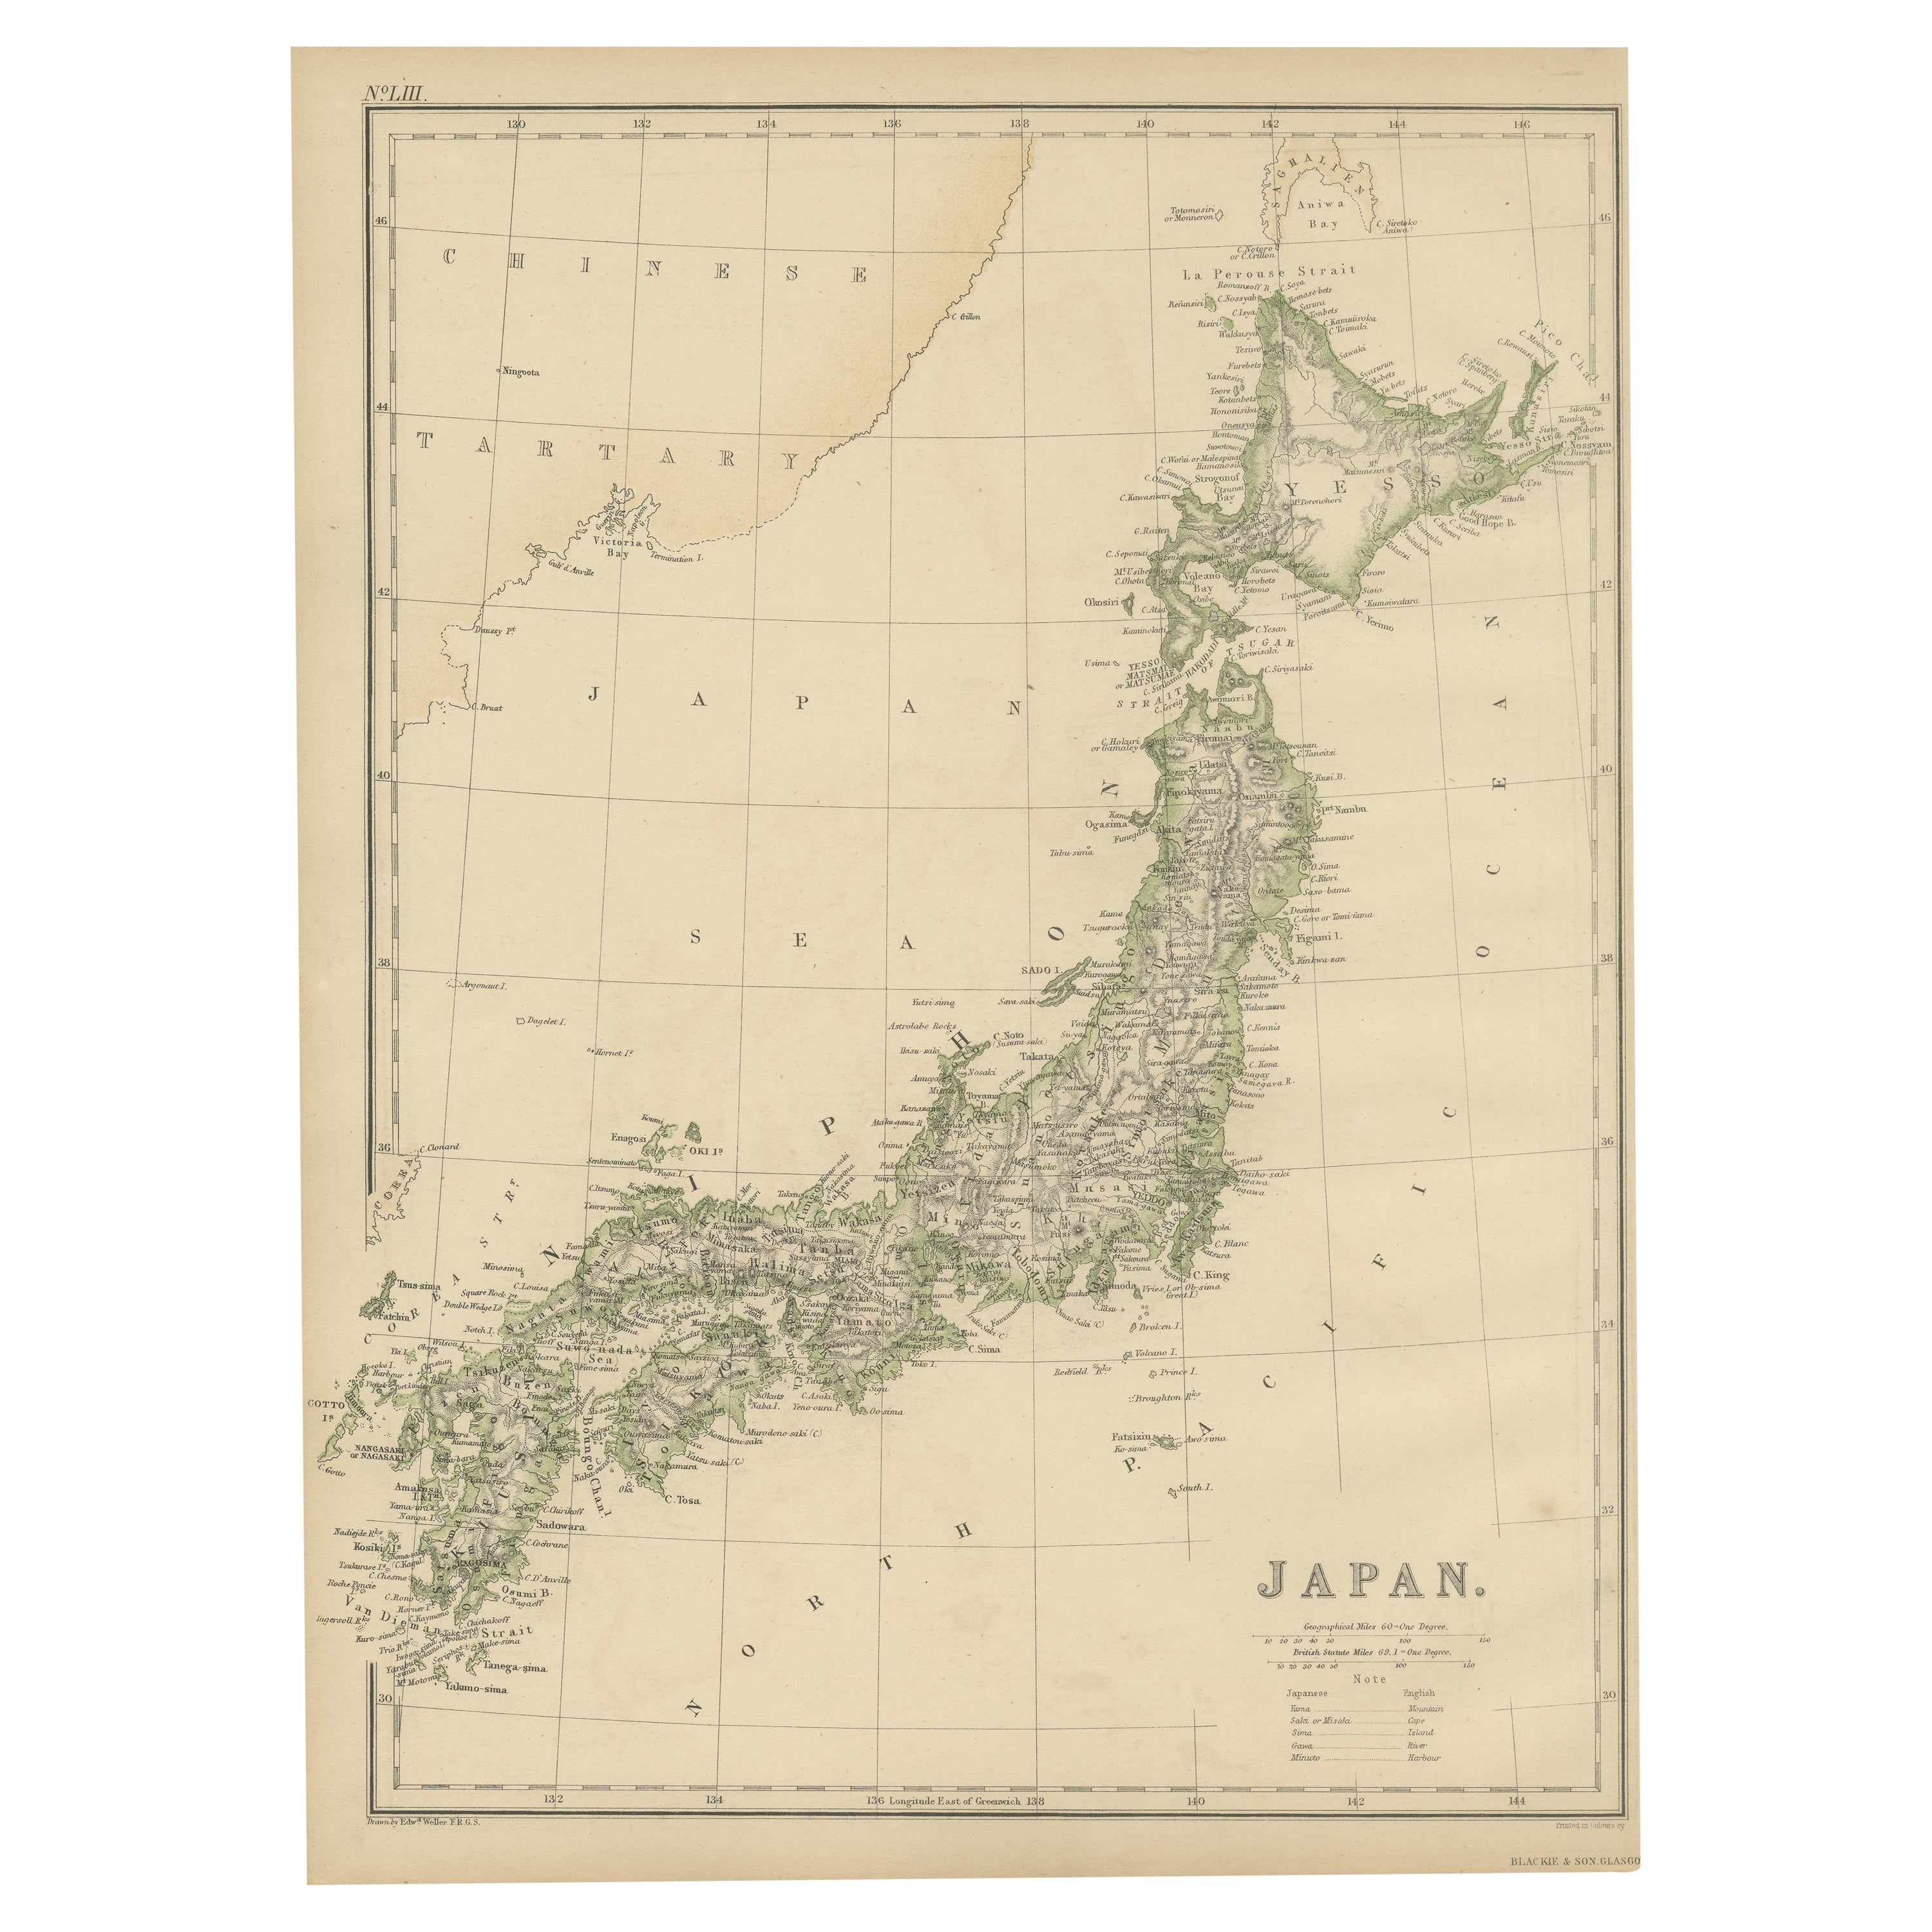 Antique Map of Japan by W. G. Blackie, 1859